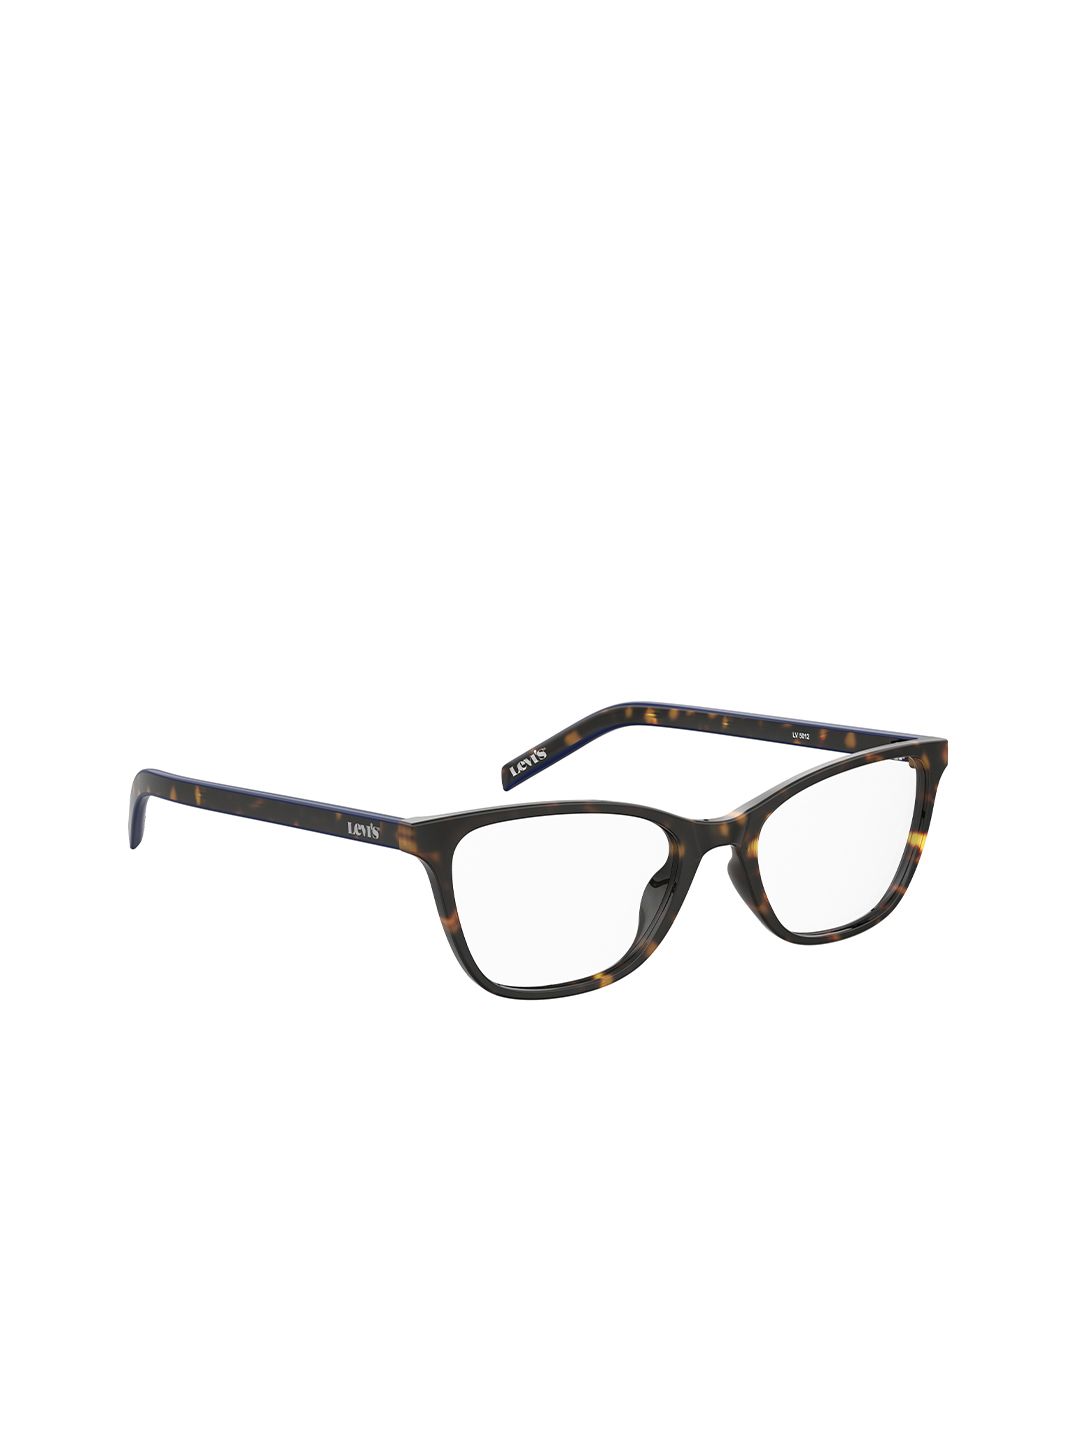 Levis Women Clear Lens & Brown Square Sunglasses with Polarised Lens Price in India